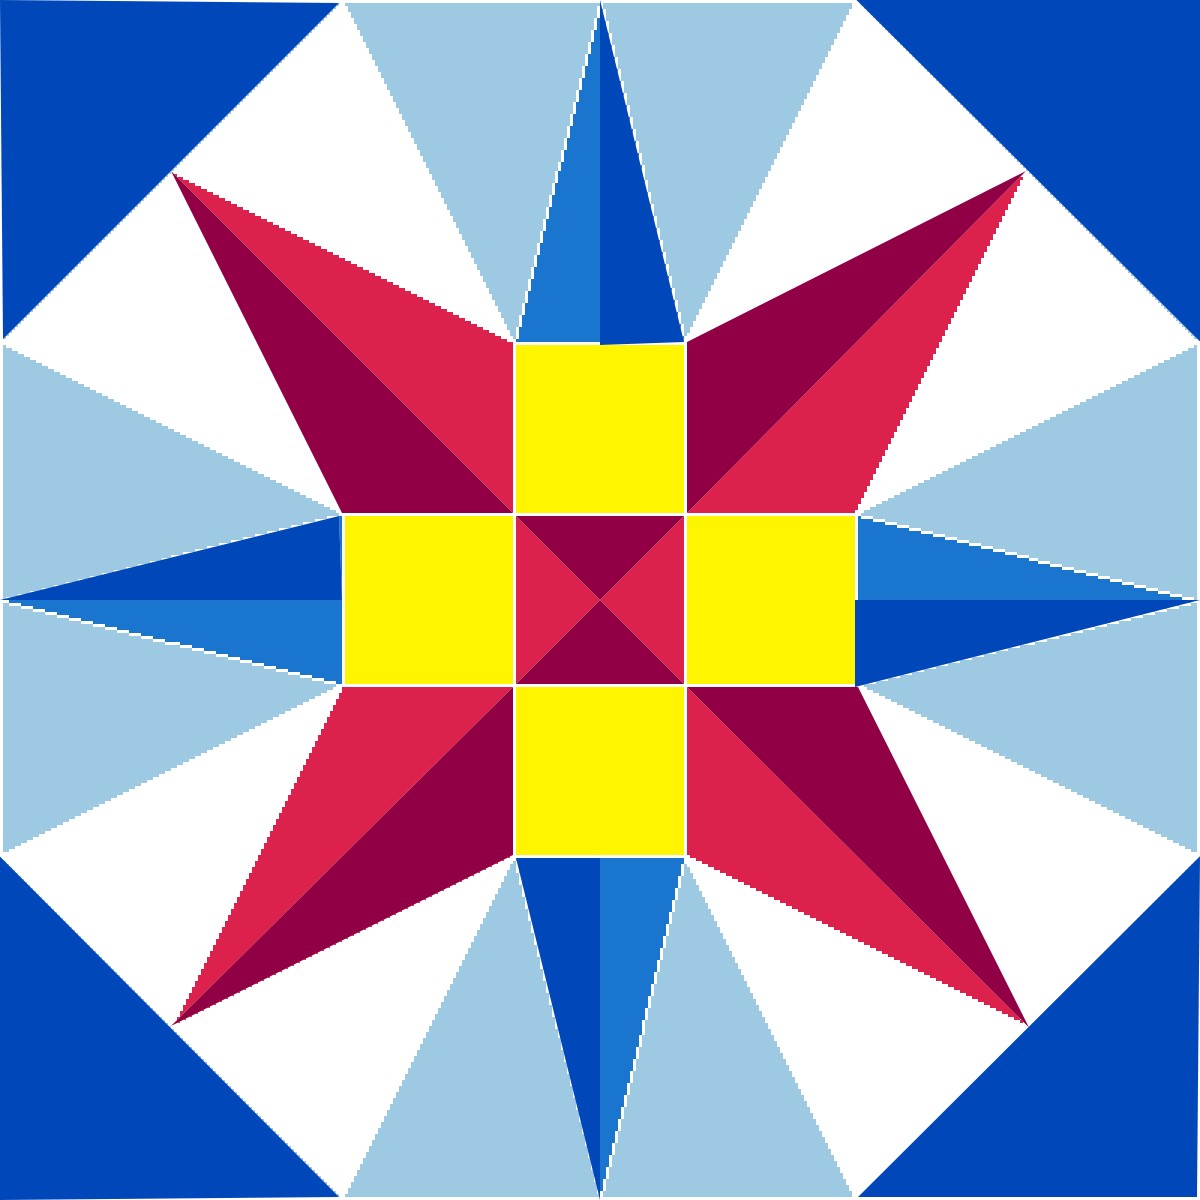 image of quilt block called New Star Of North Carolina